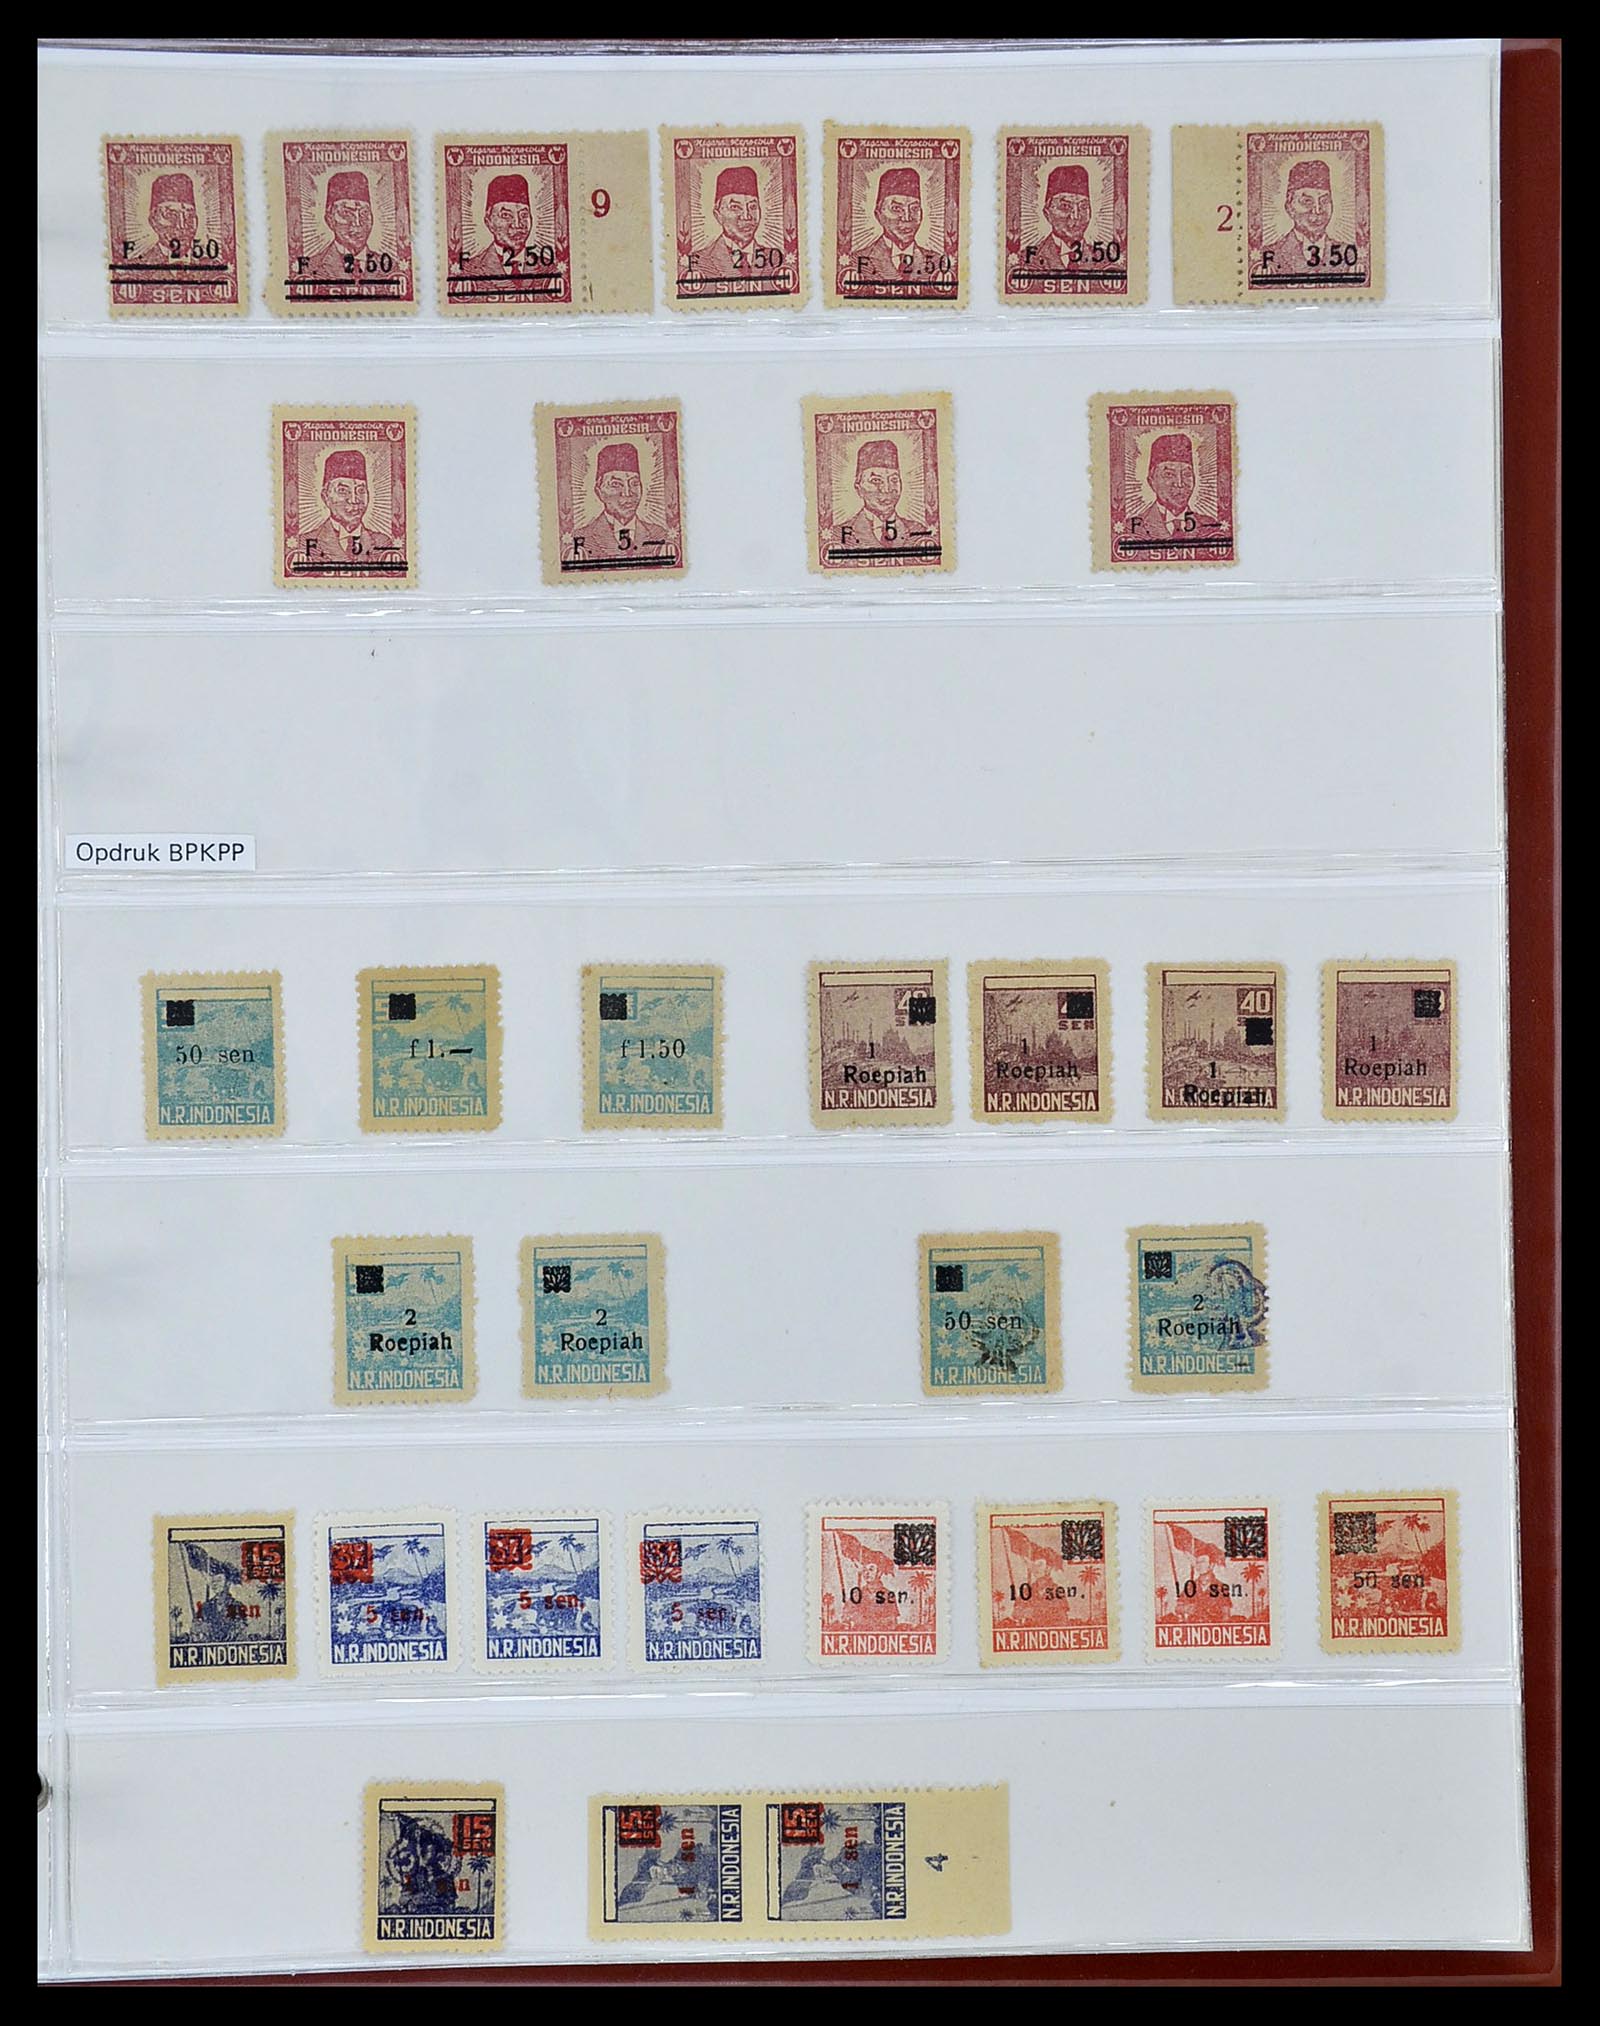 34545 082 - Stamp Collection 34545 Japanese Occupation of the Dutch East Indies and 